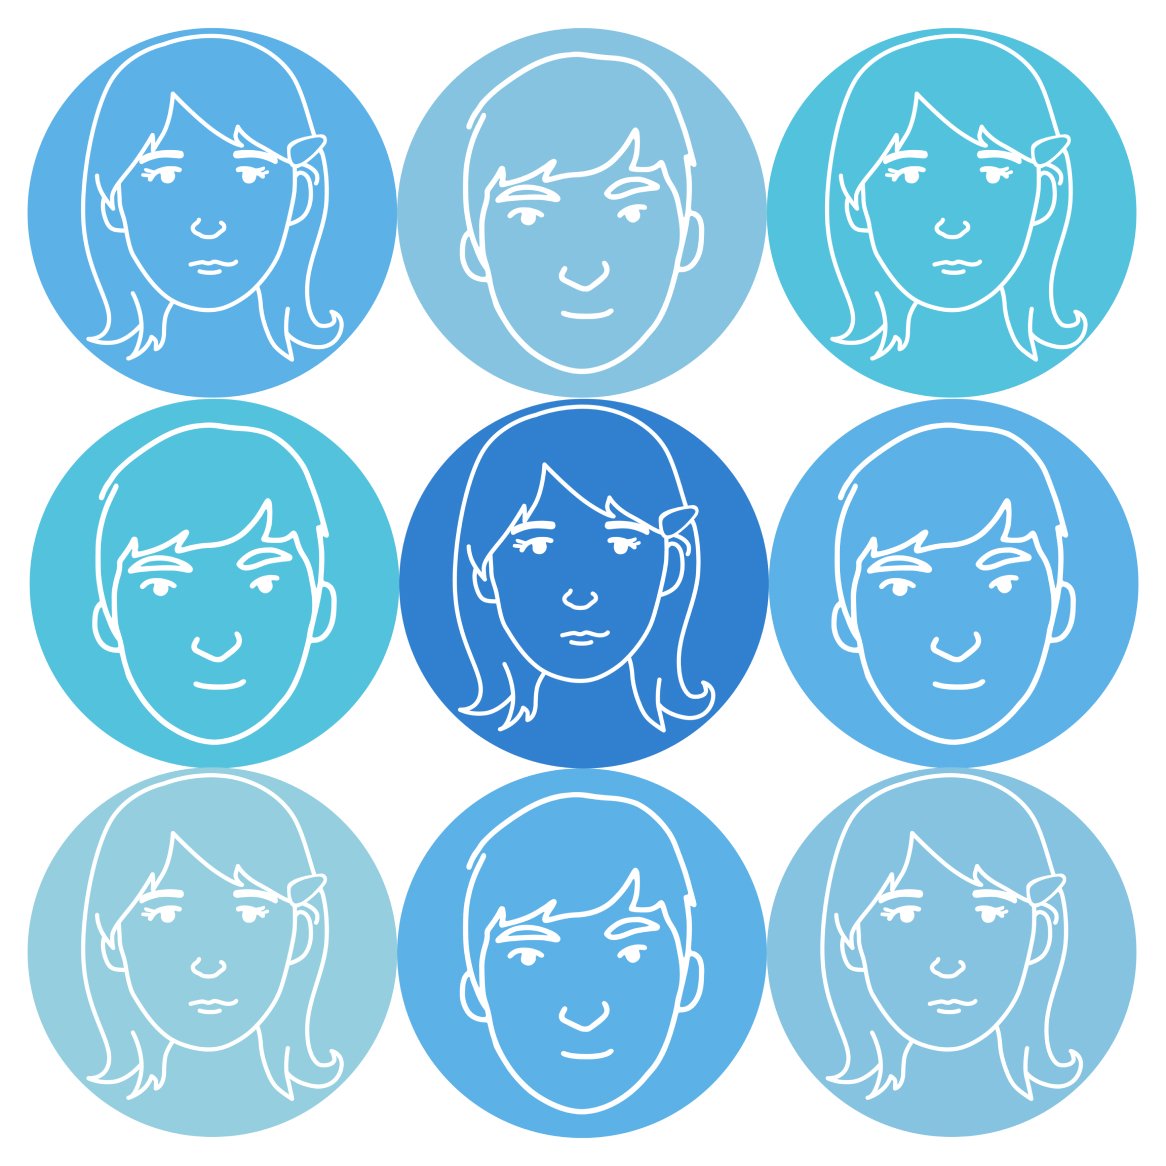 Compilation of oval faces